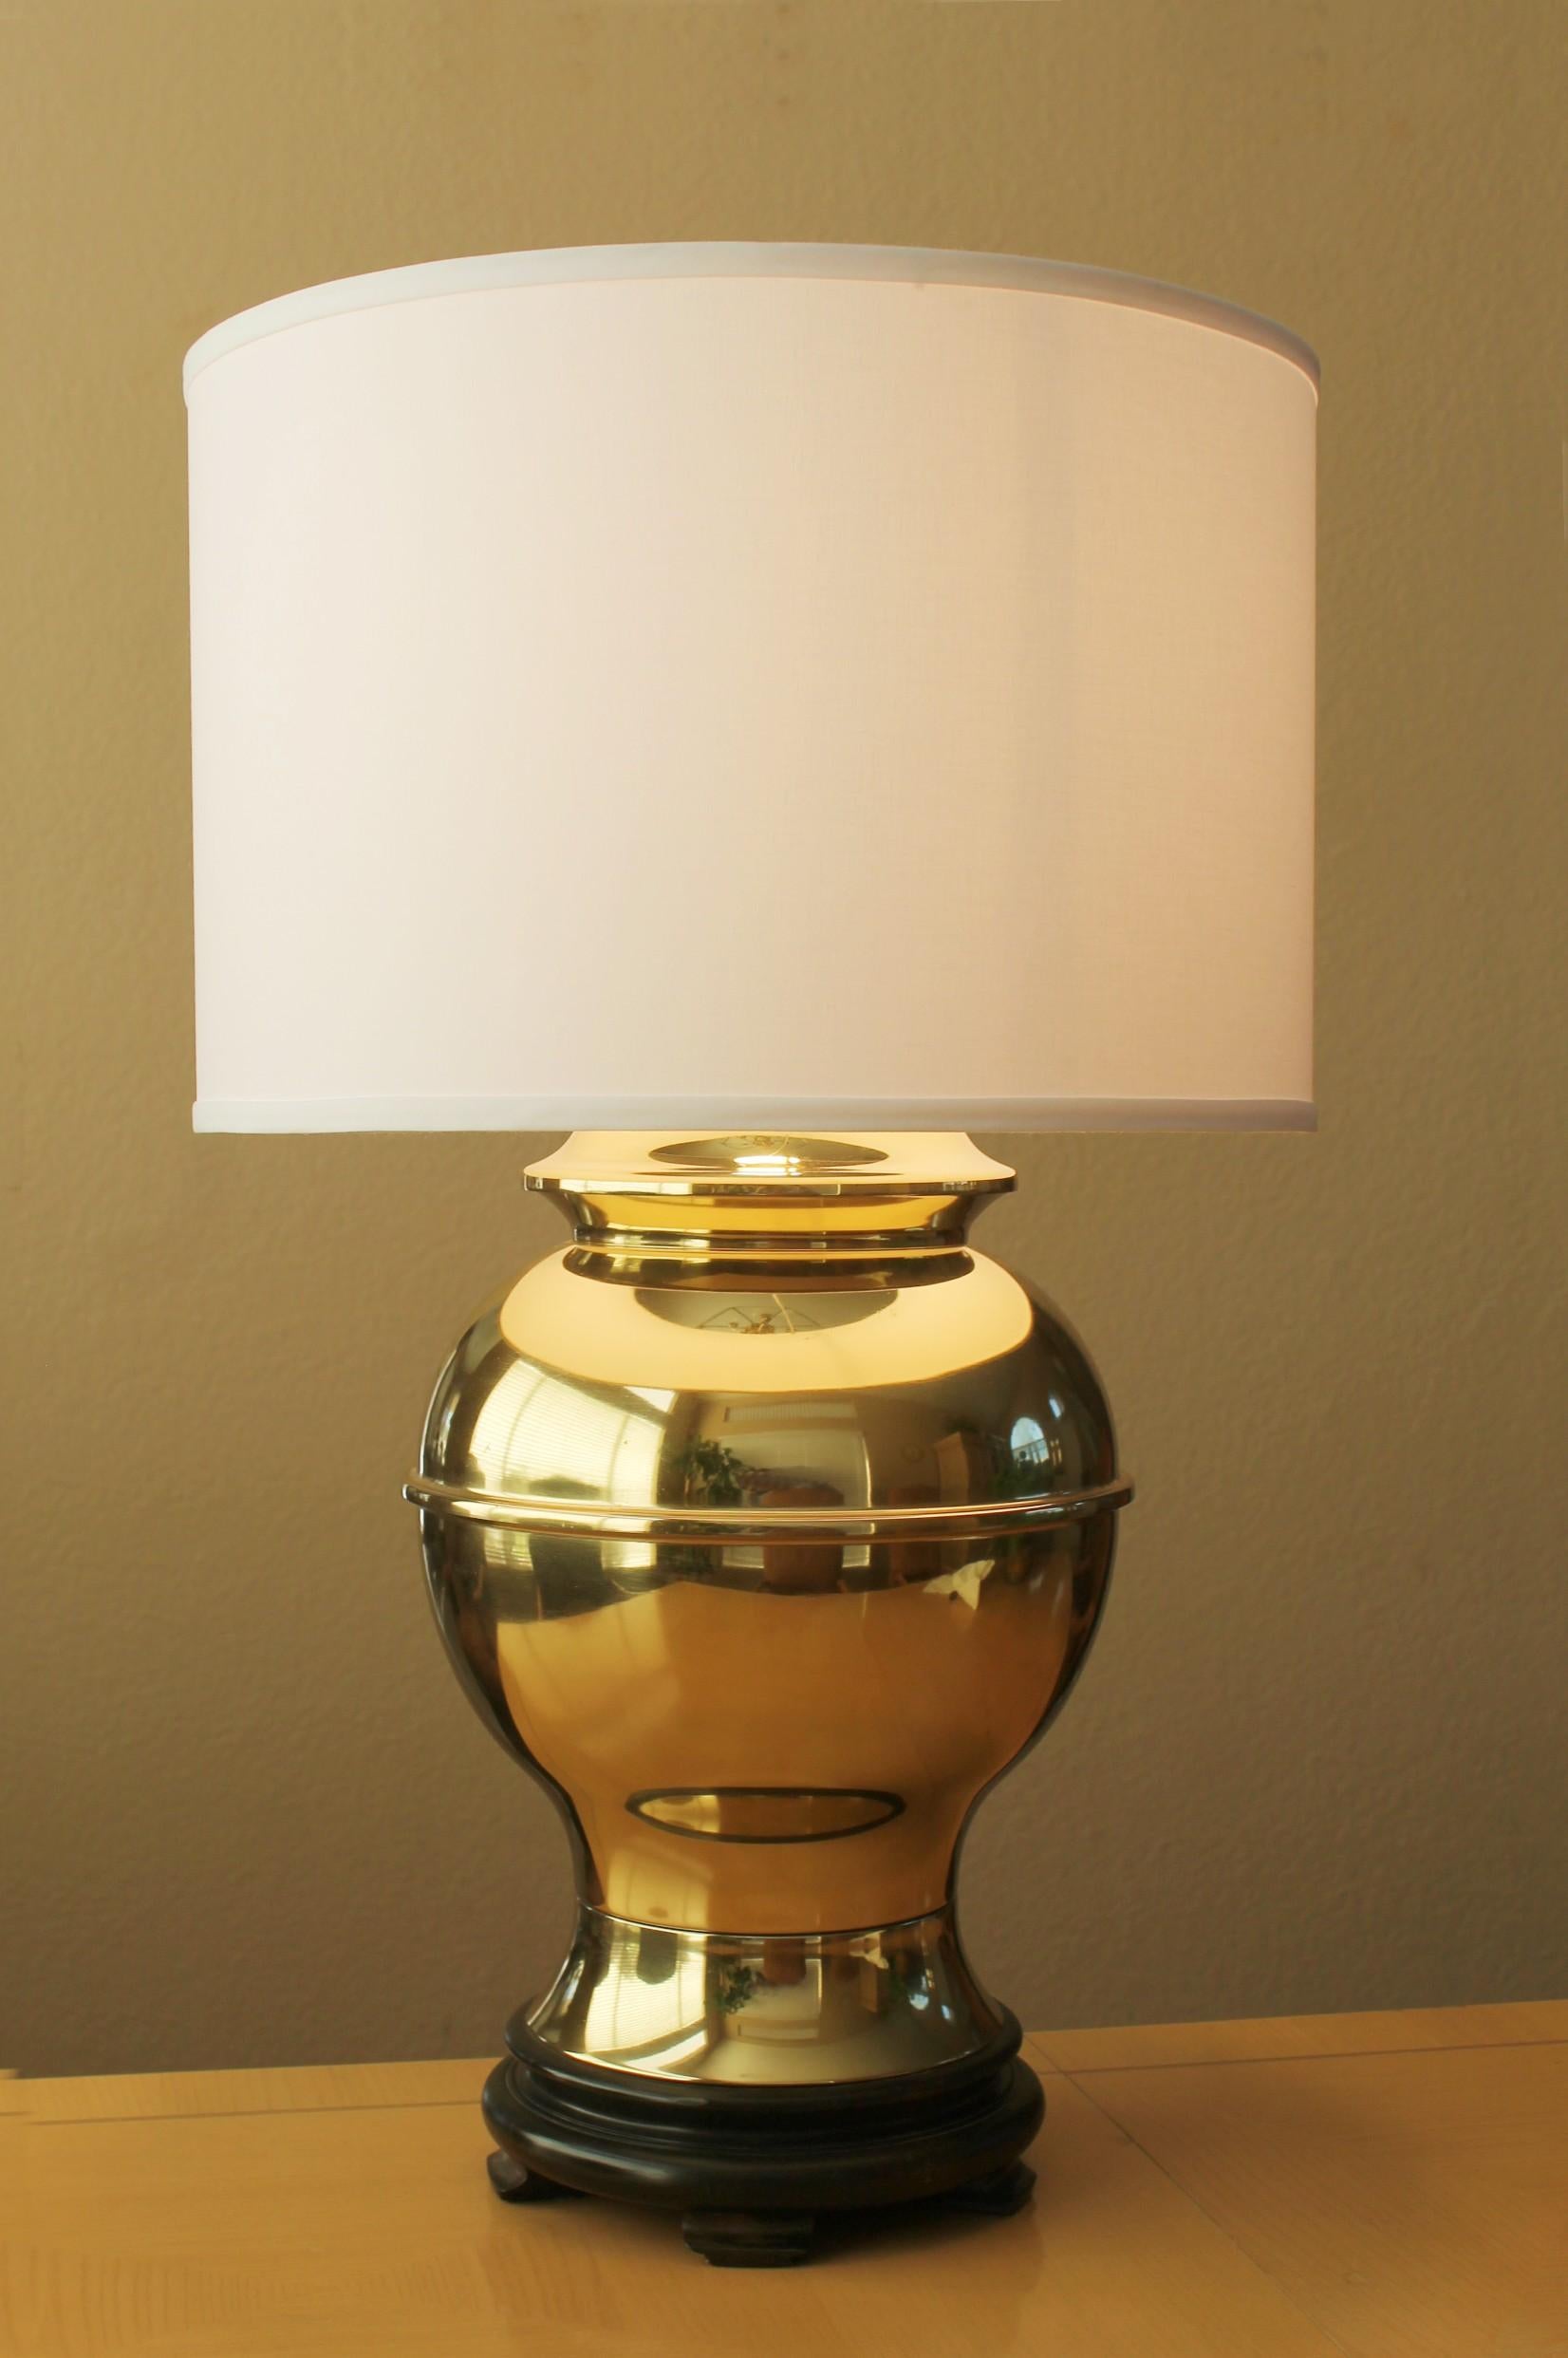 STUNNING!

1980S HOLLYWOOD REGENCY
BRASS GINGER JAR
LARGE TABLE LAMP

Exquisite White Linen Drum Shade

Dimensions: 18